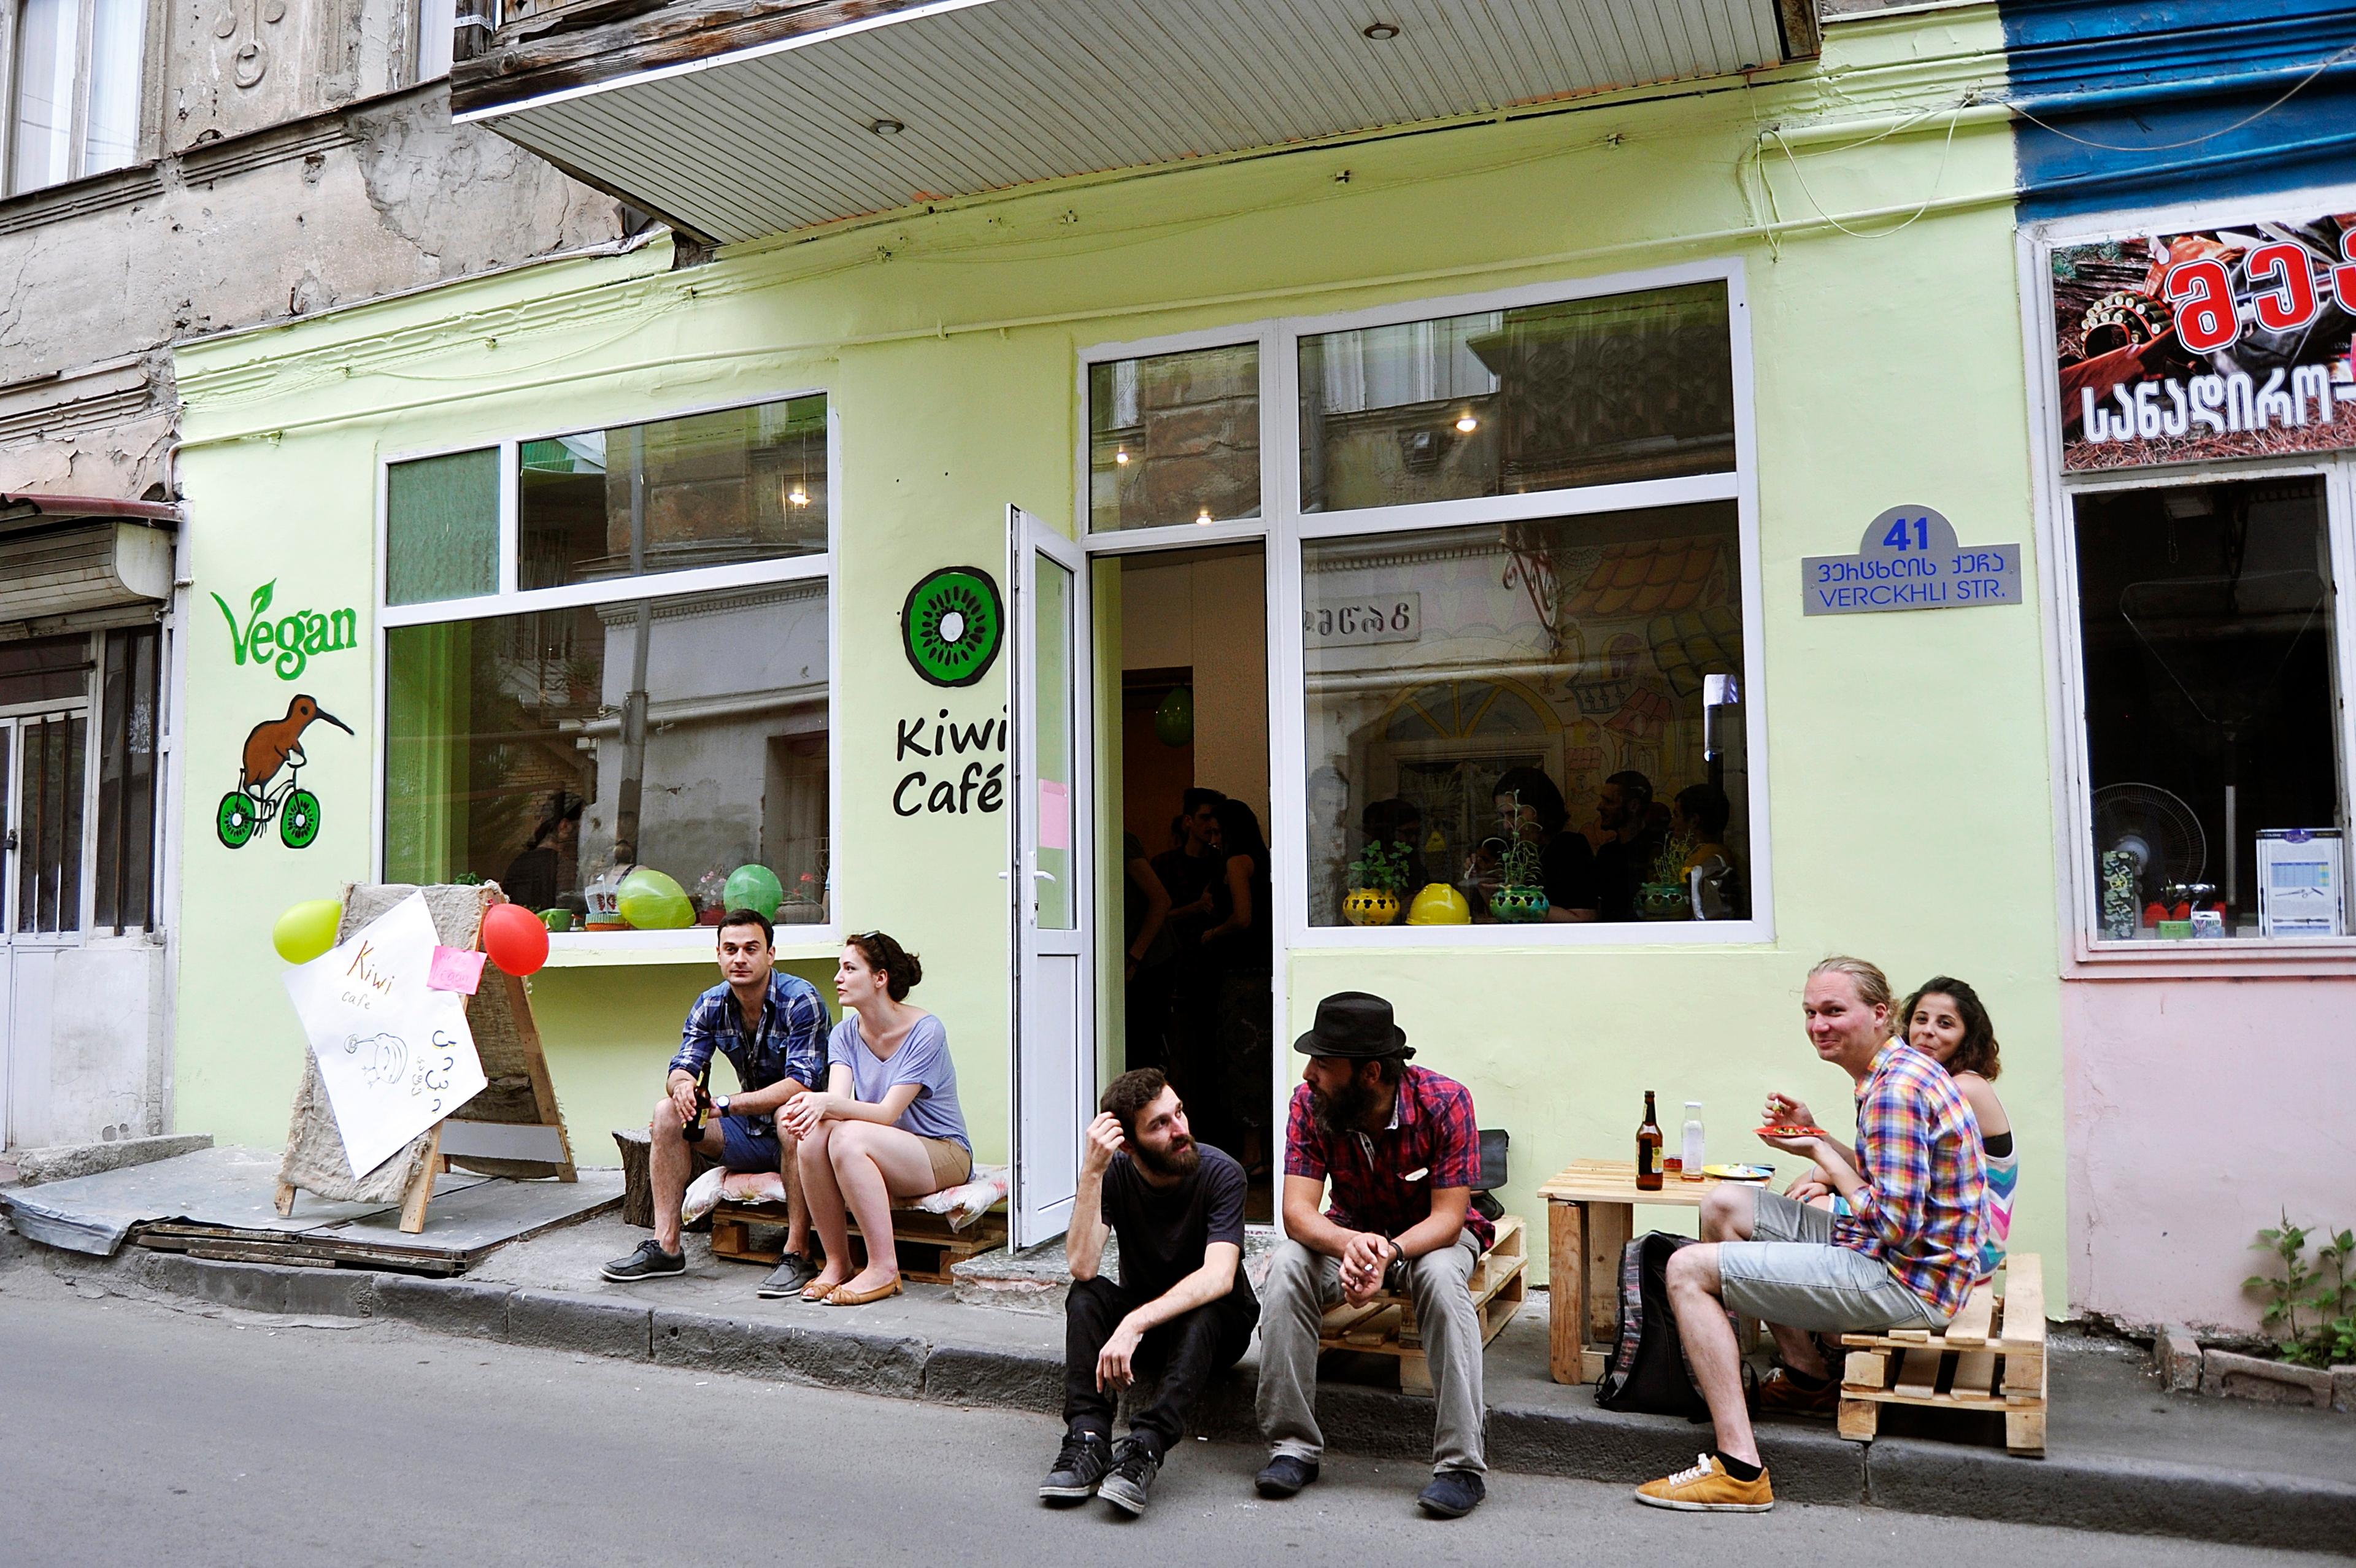 Cover image of this place Kiwi Cafe